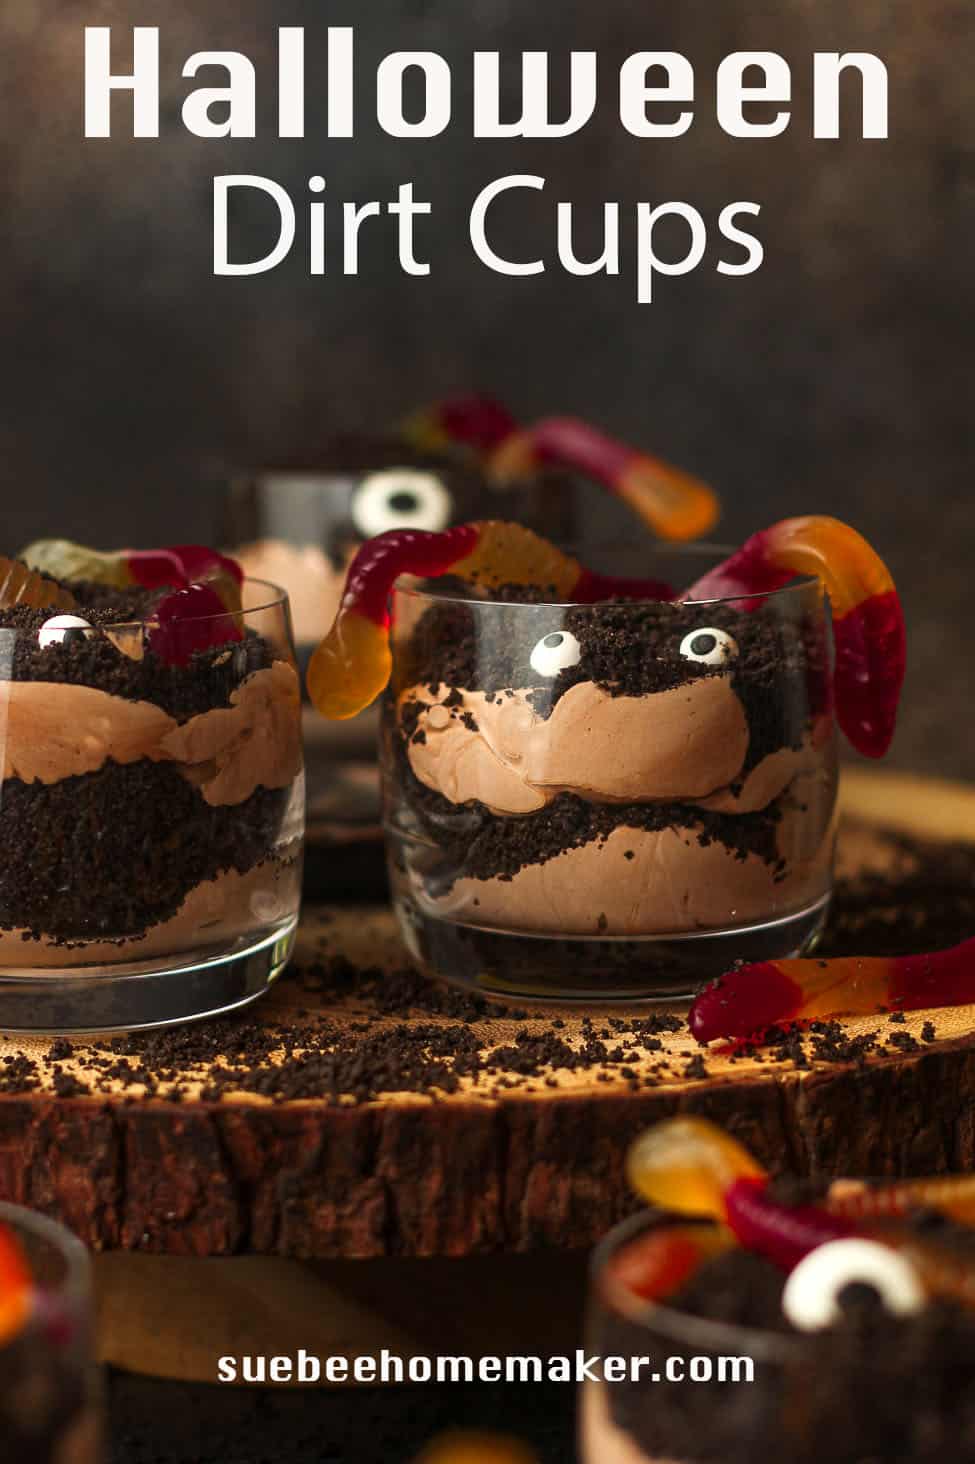 Side view of several Halloween dirt cups with spooky eyes.